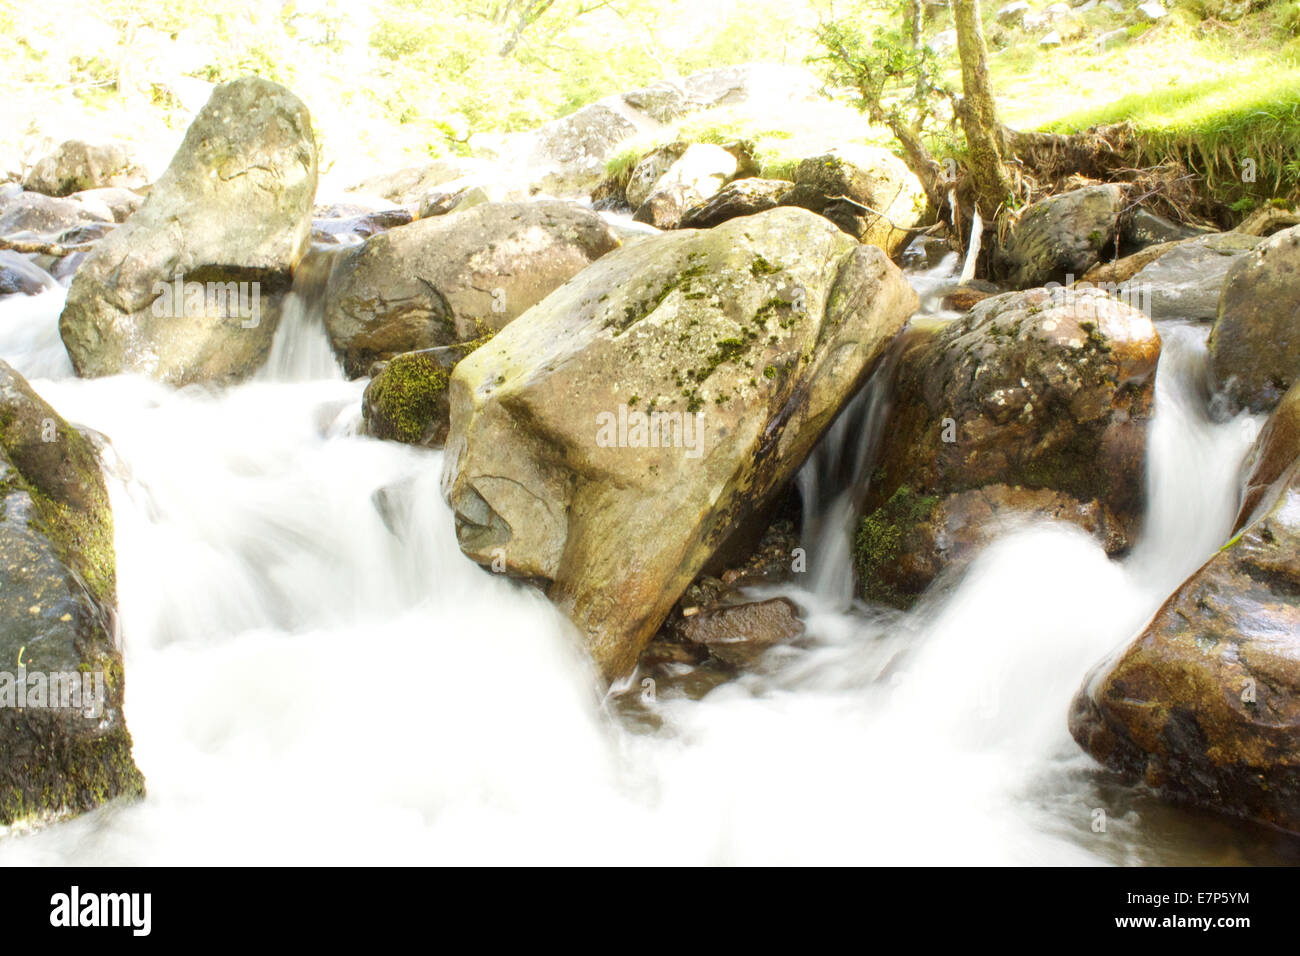 Fast flowing river over rocks showing a slow motion flow of the water. Stock Photo